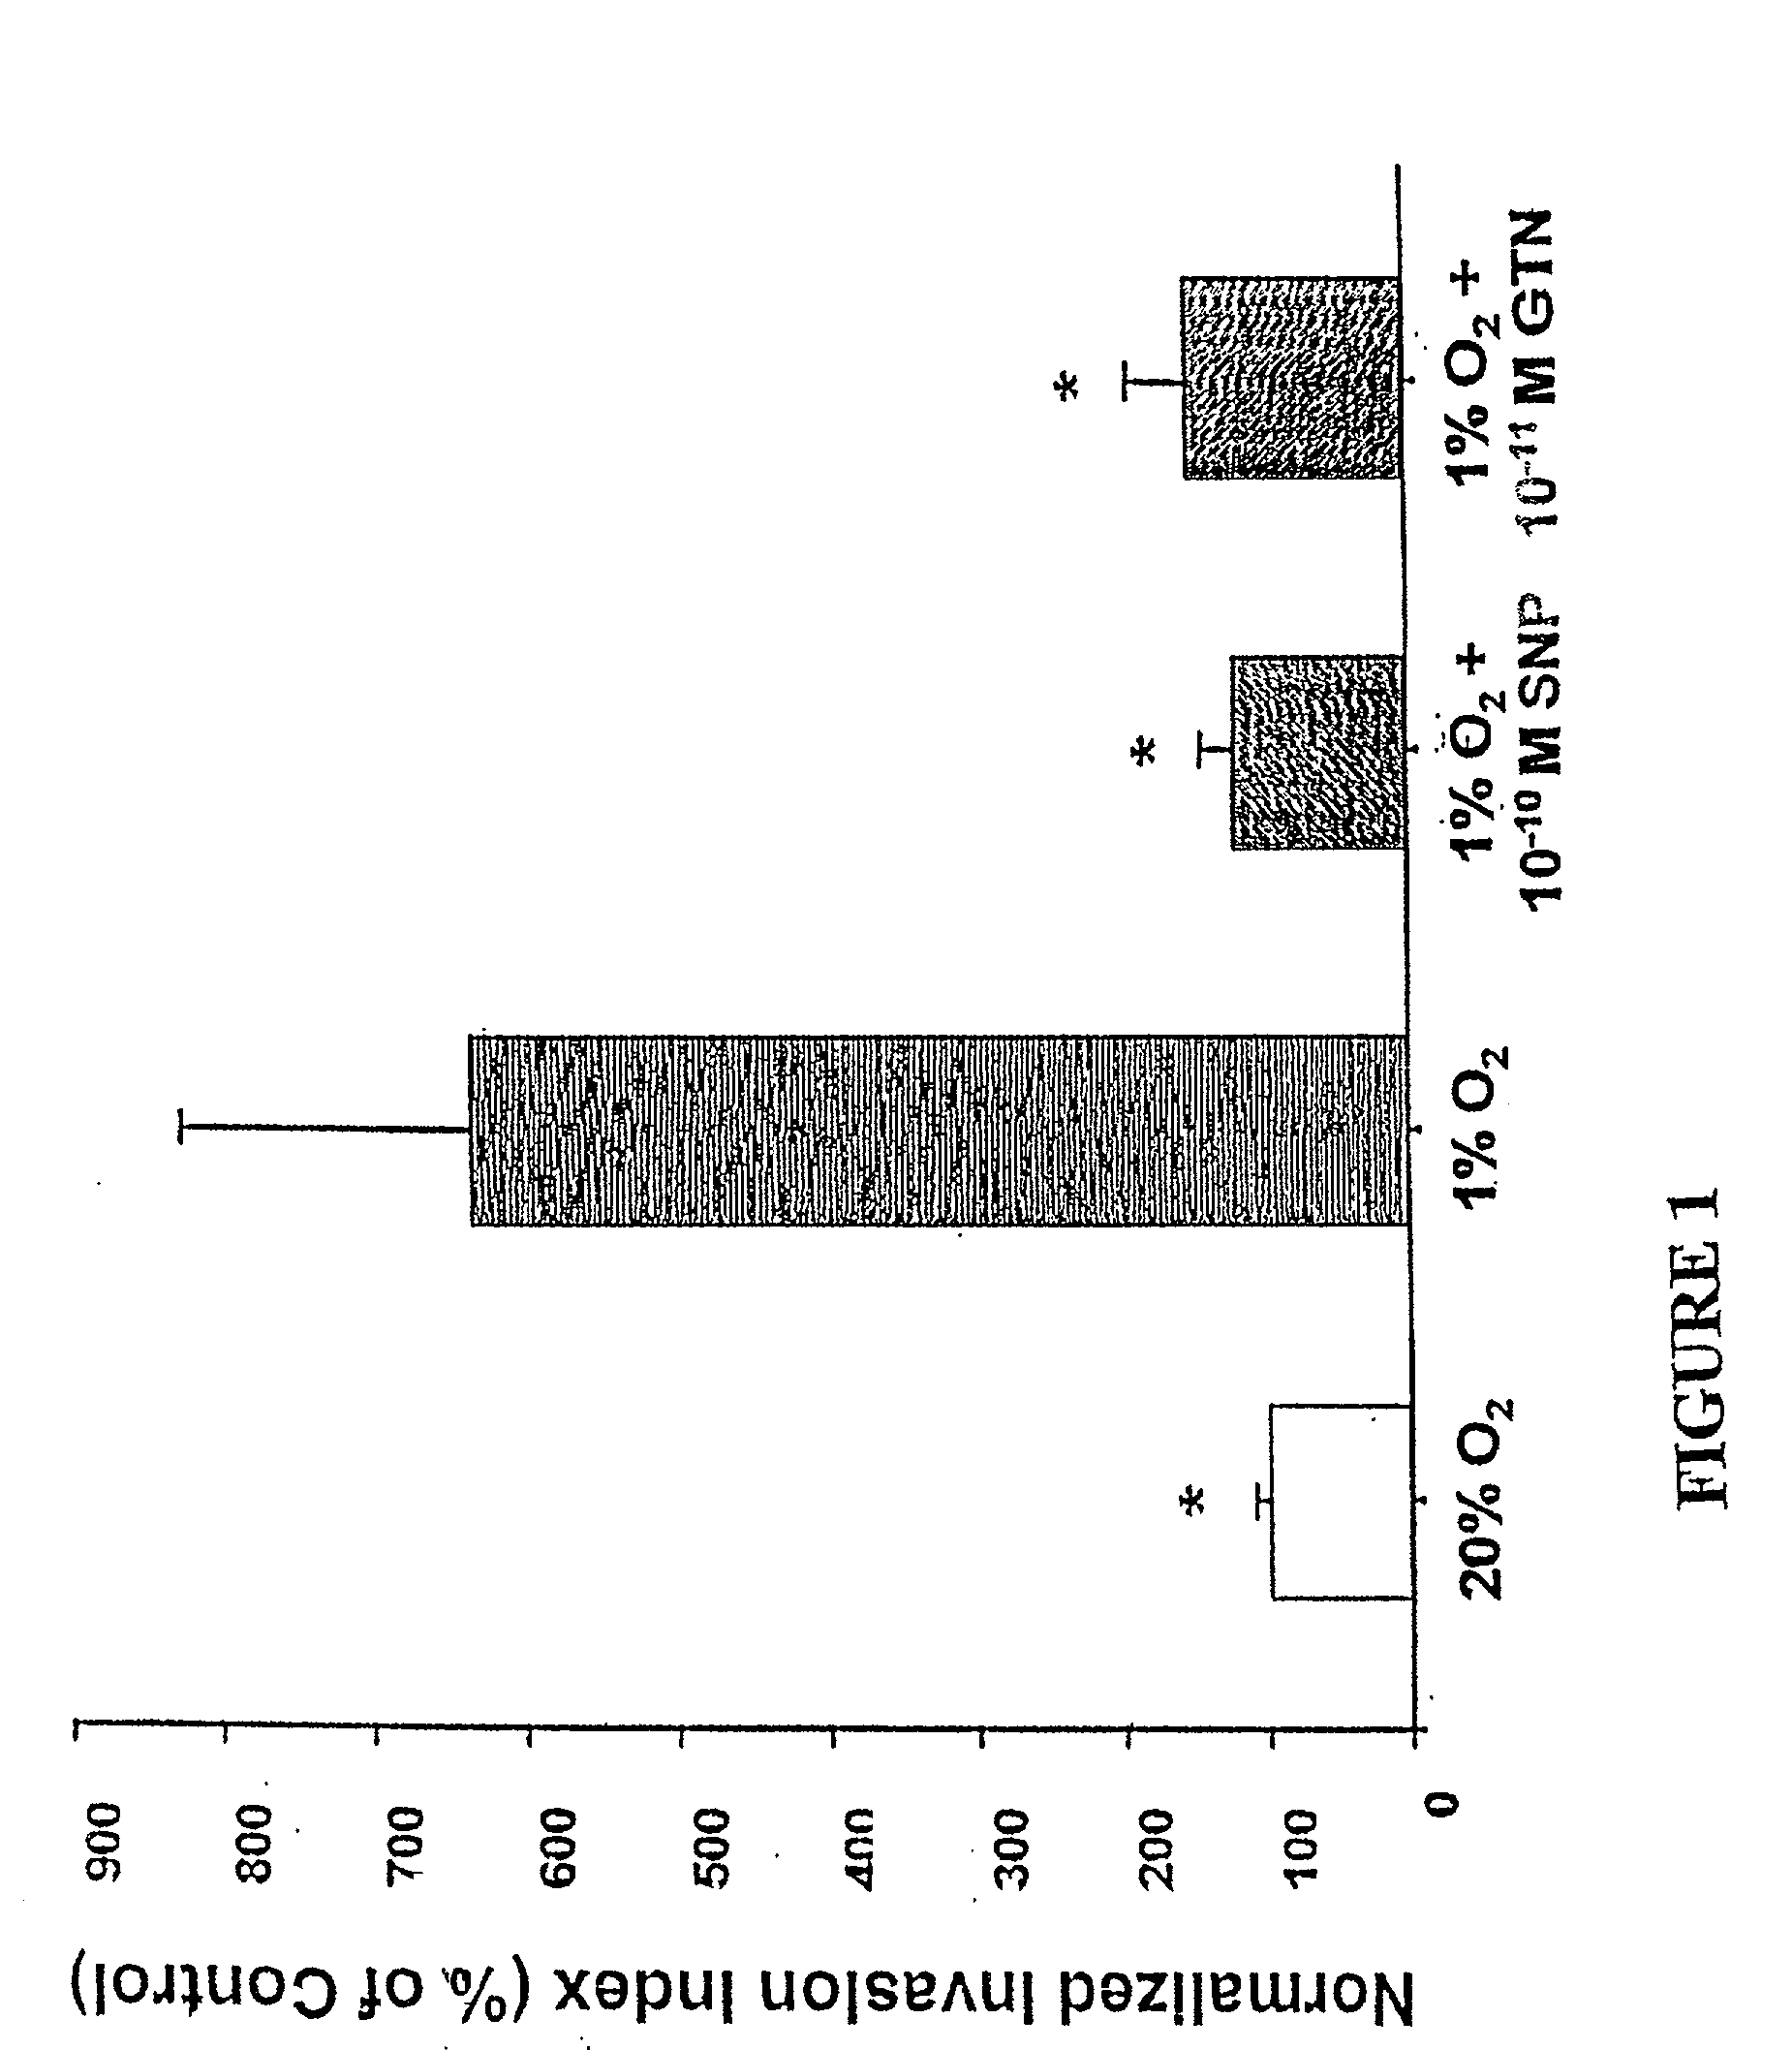 Formulations and methods of using nitric oxide mimetics against a malignant cell phenotype